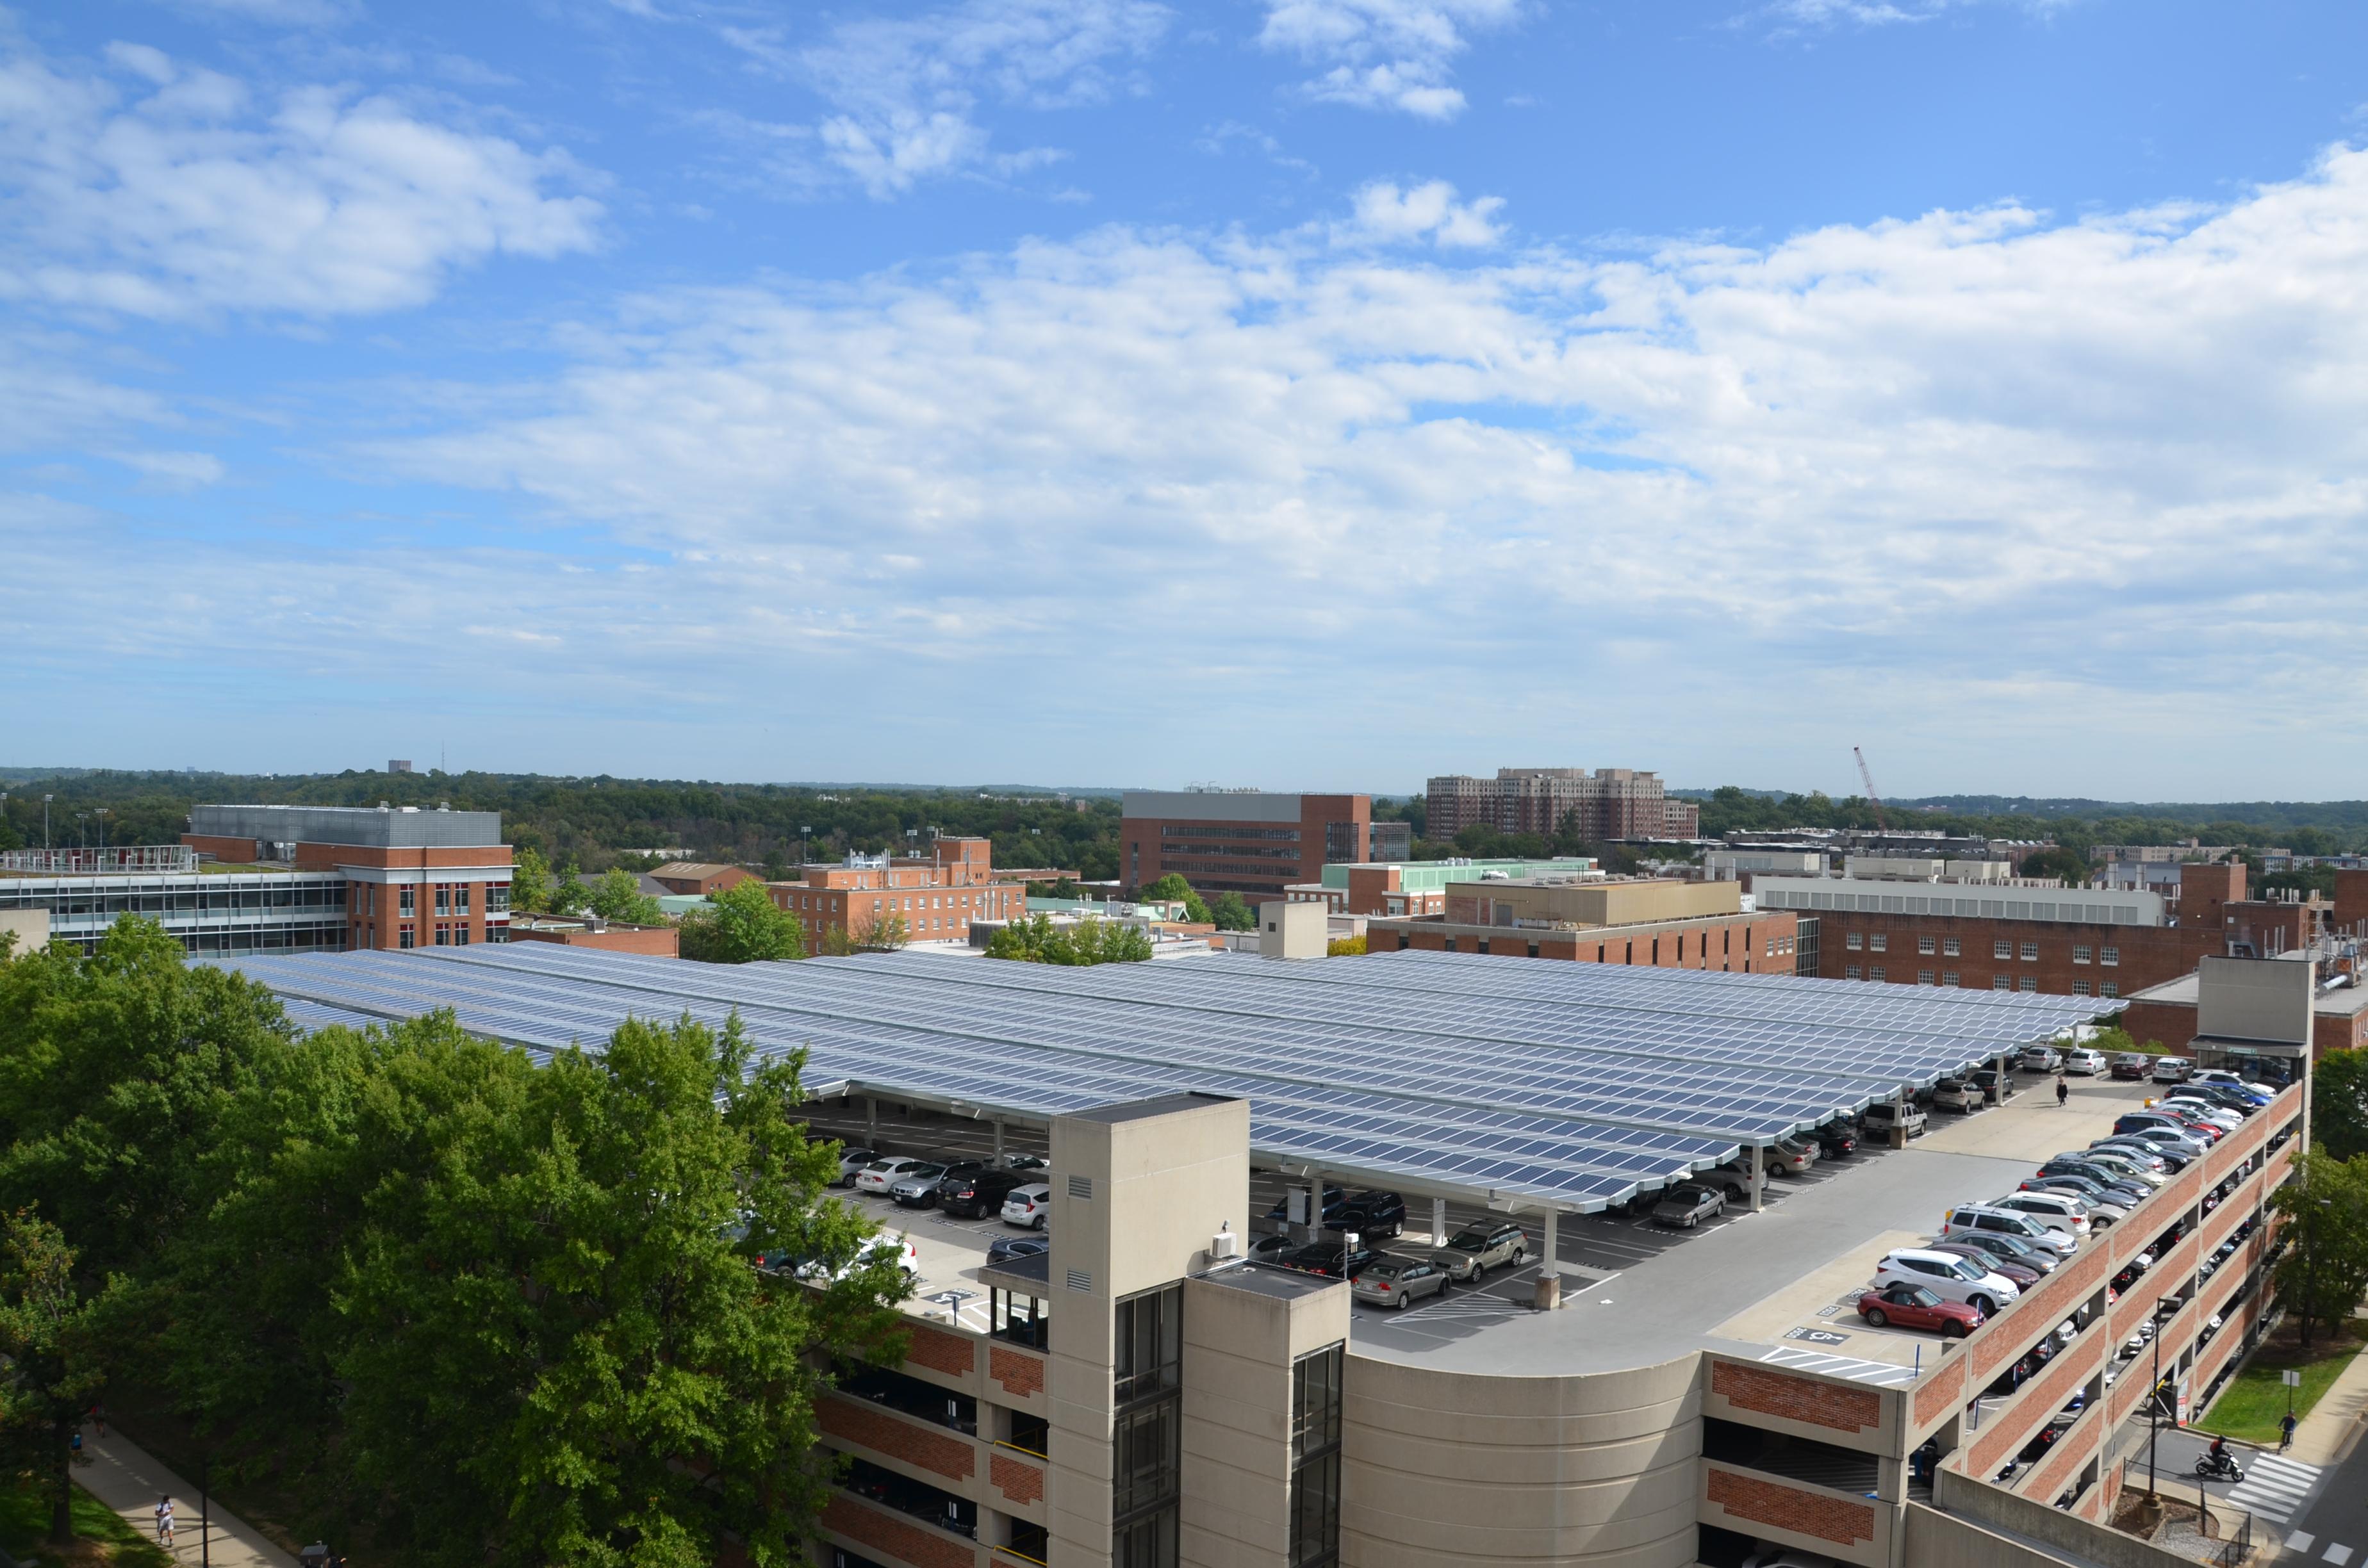 Solar array on campus rooftop